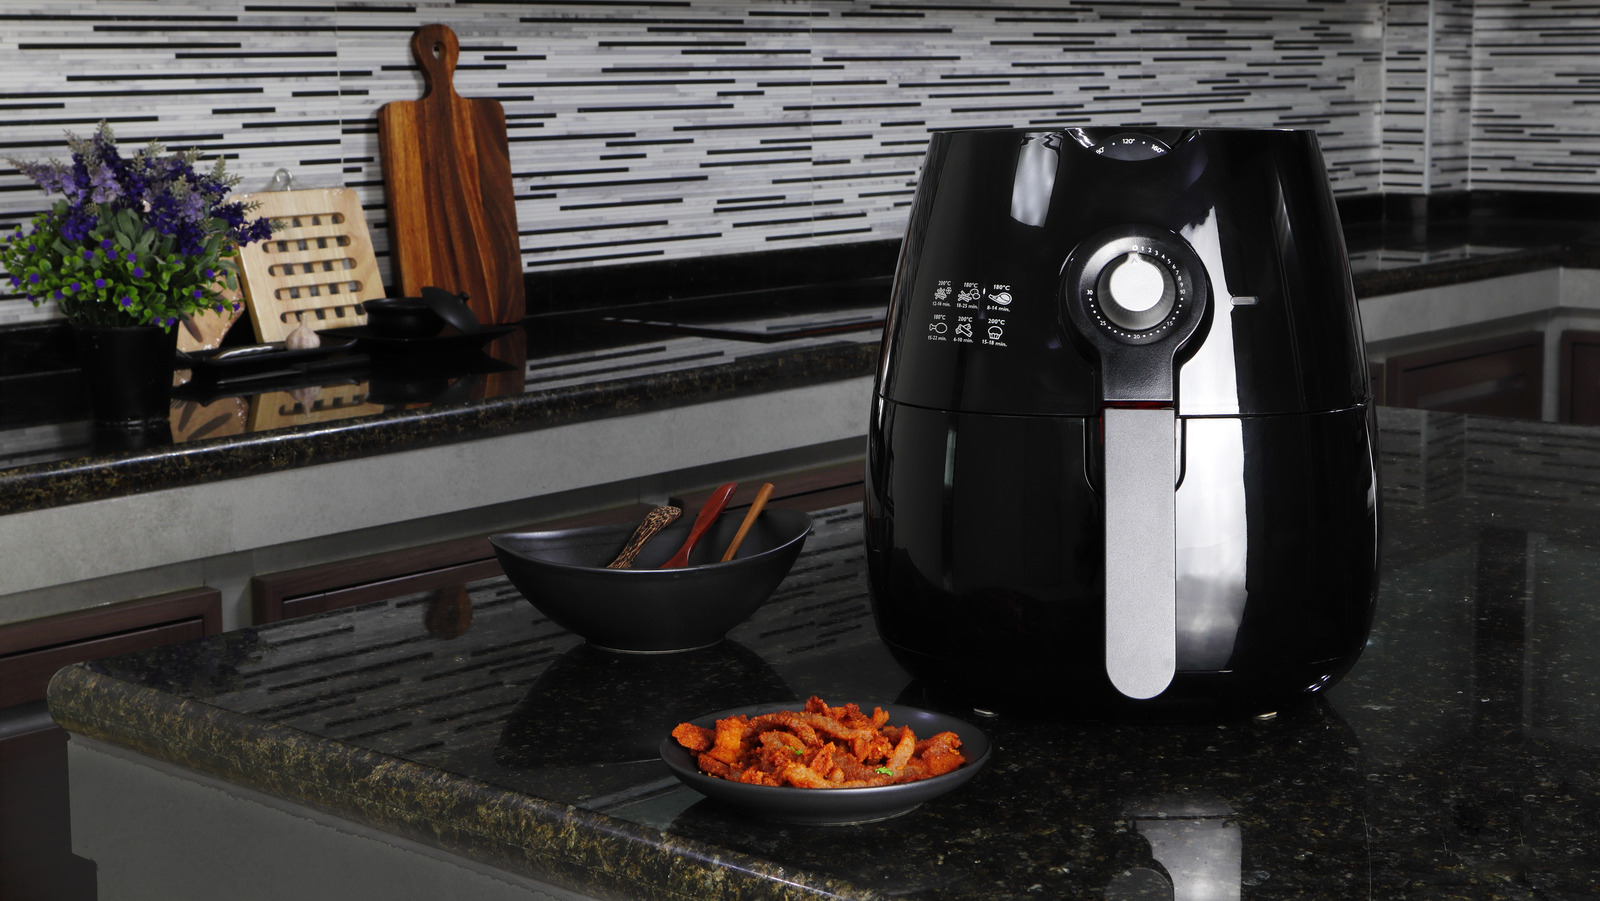 https://www.thedailymeal.com/img/gallery/the-12-biggest-air-fryer-mistakes-to-avoid/l-intro-1669839492.jpg